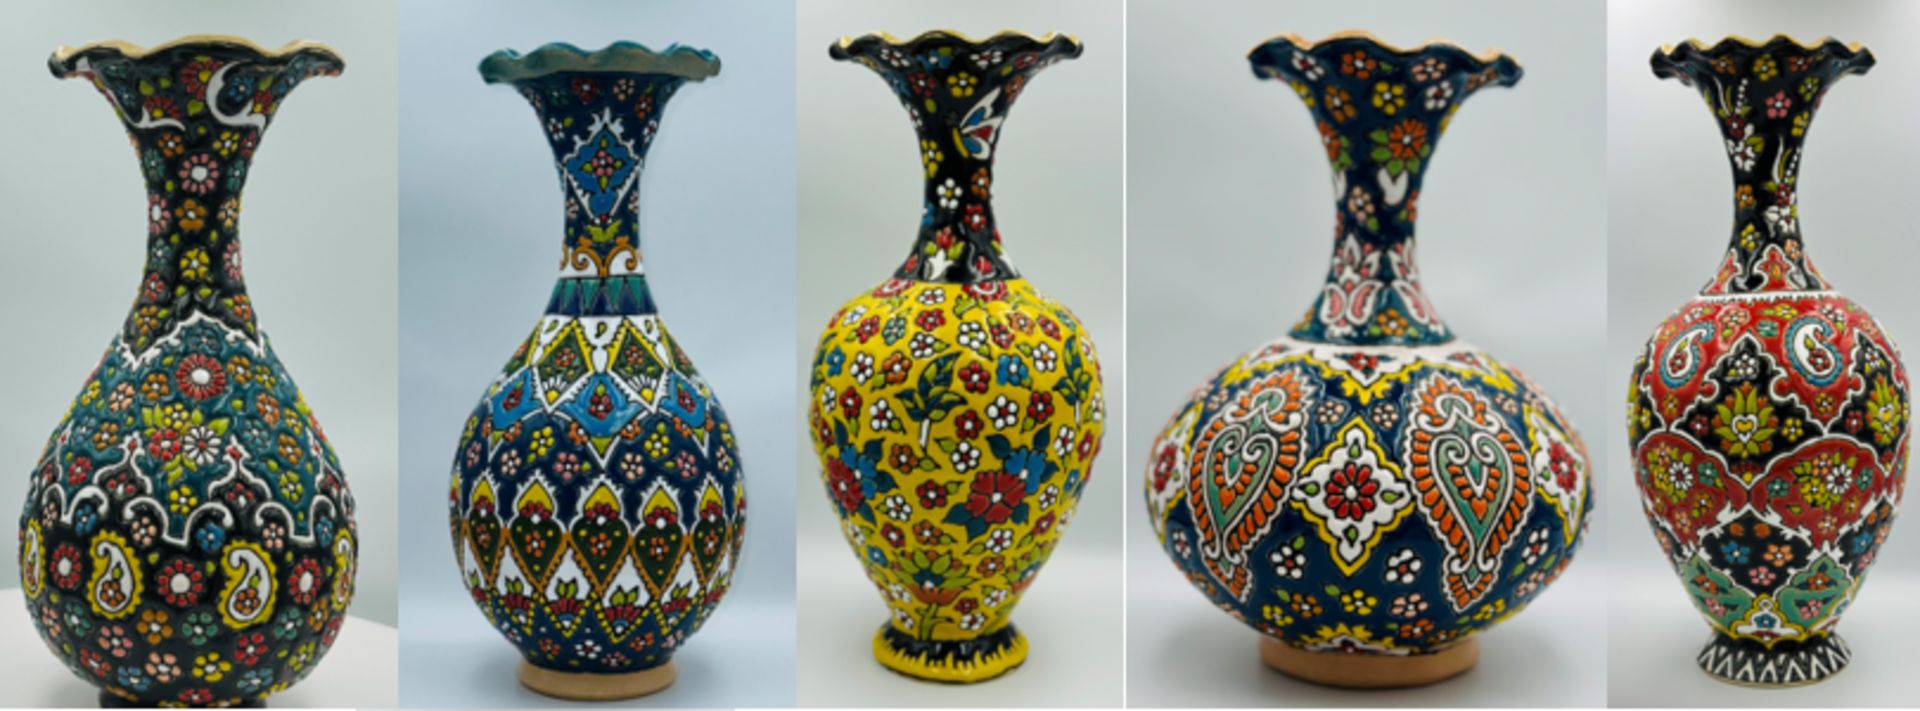 169 X HAND MADE VASES - ASSORTED SIZES AND DESIGNS - 23CM - 33CM